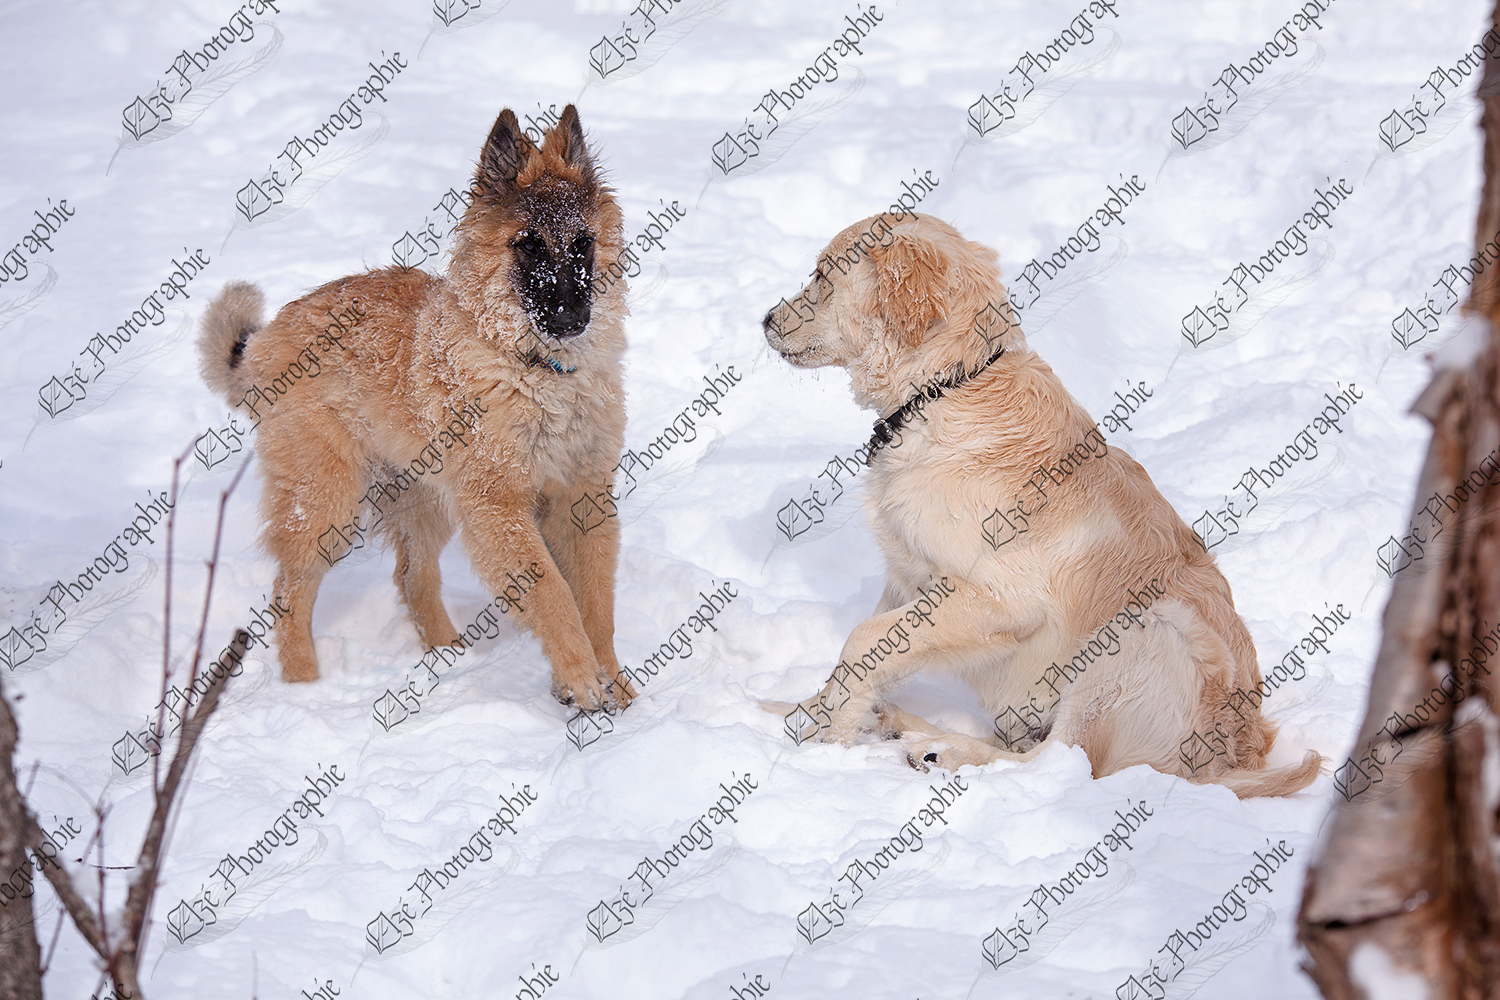 elze_photo_5989_chiots_erabliere_hiver_dogs_playing